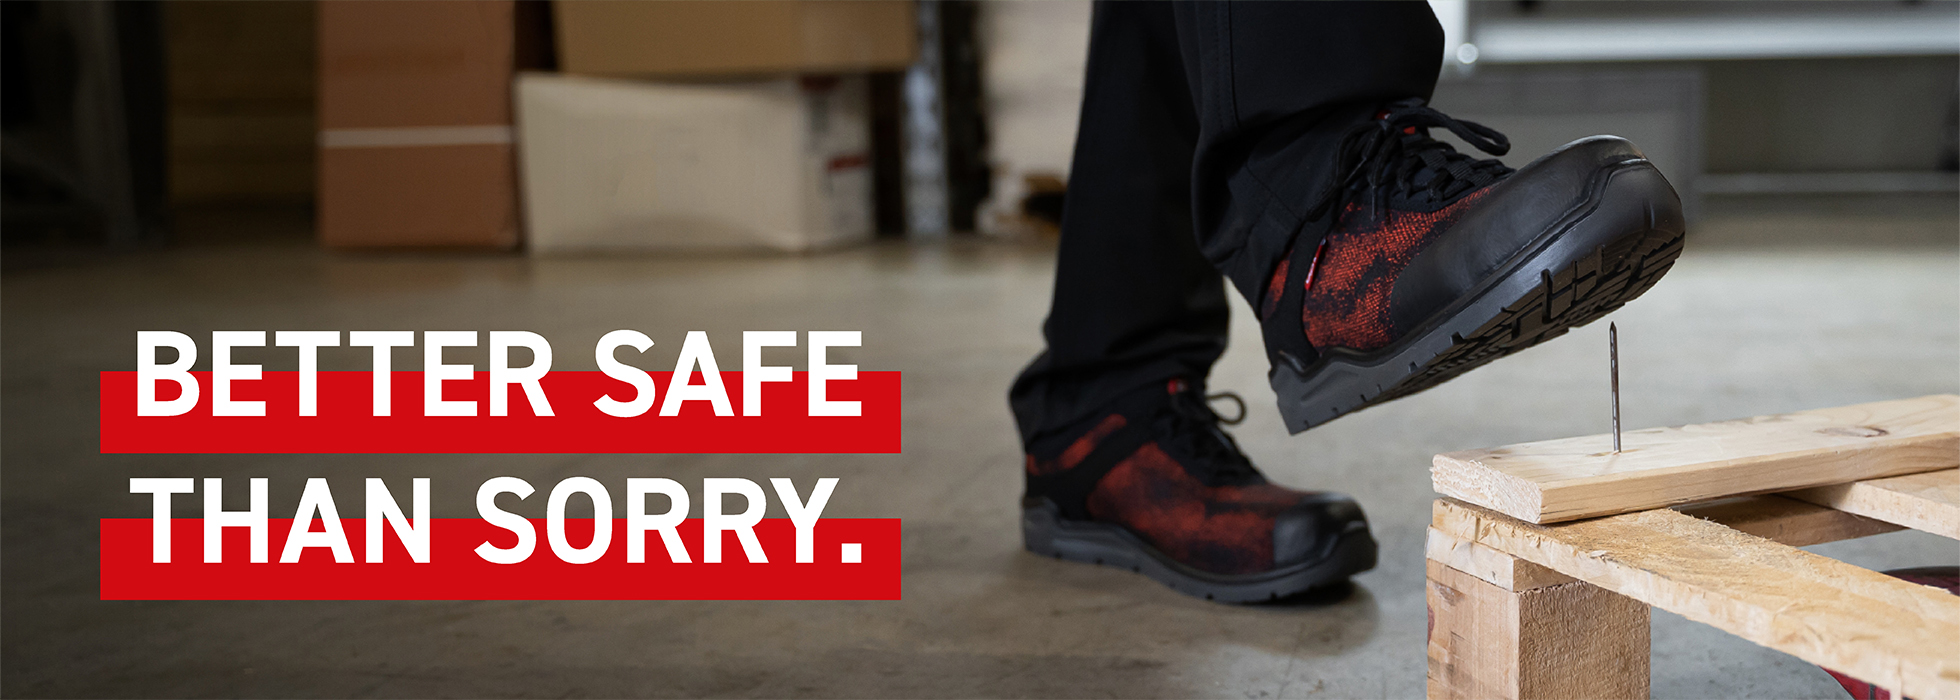 Which shoe do I need? - Safety classes at a glance